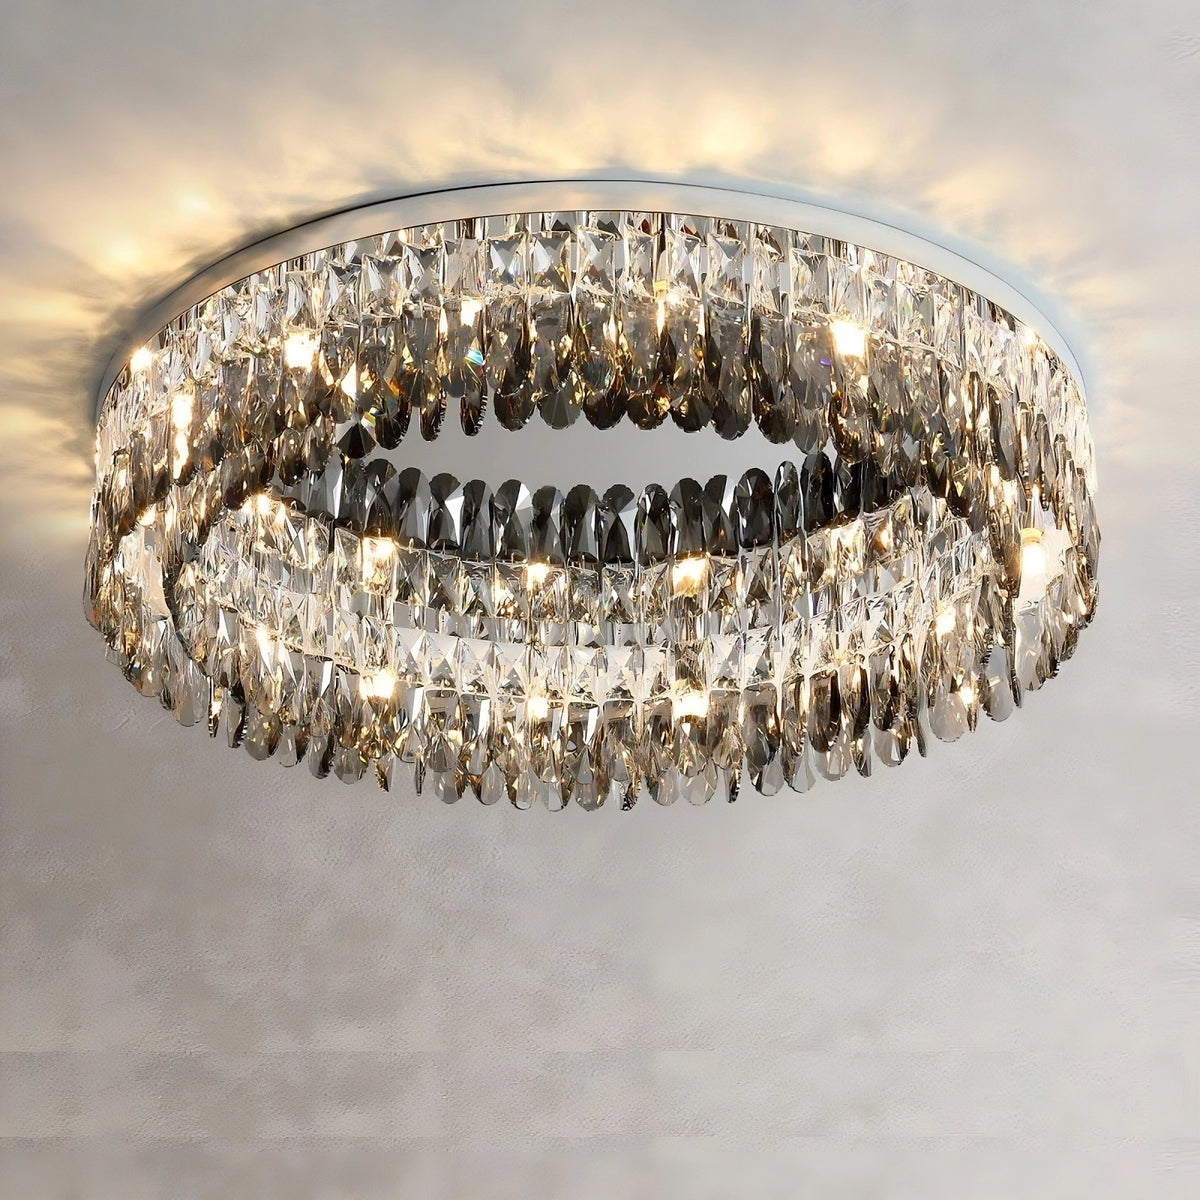 A handmade Giano Crystal Ceiling Light by Morsale.com with two concentric rings of hanging crystals, mounted flush to the ceiling. The chandelier is illuminated, creating a sparkling effect as light reflects off the crystals. The plain, light-colored ceiling enhances its classic luxury appeal.